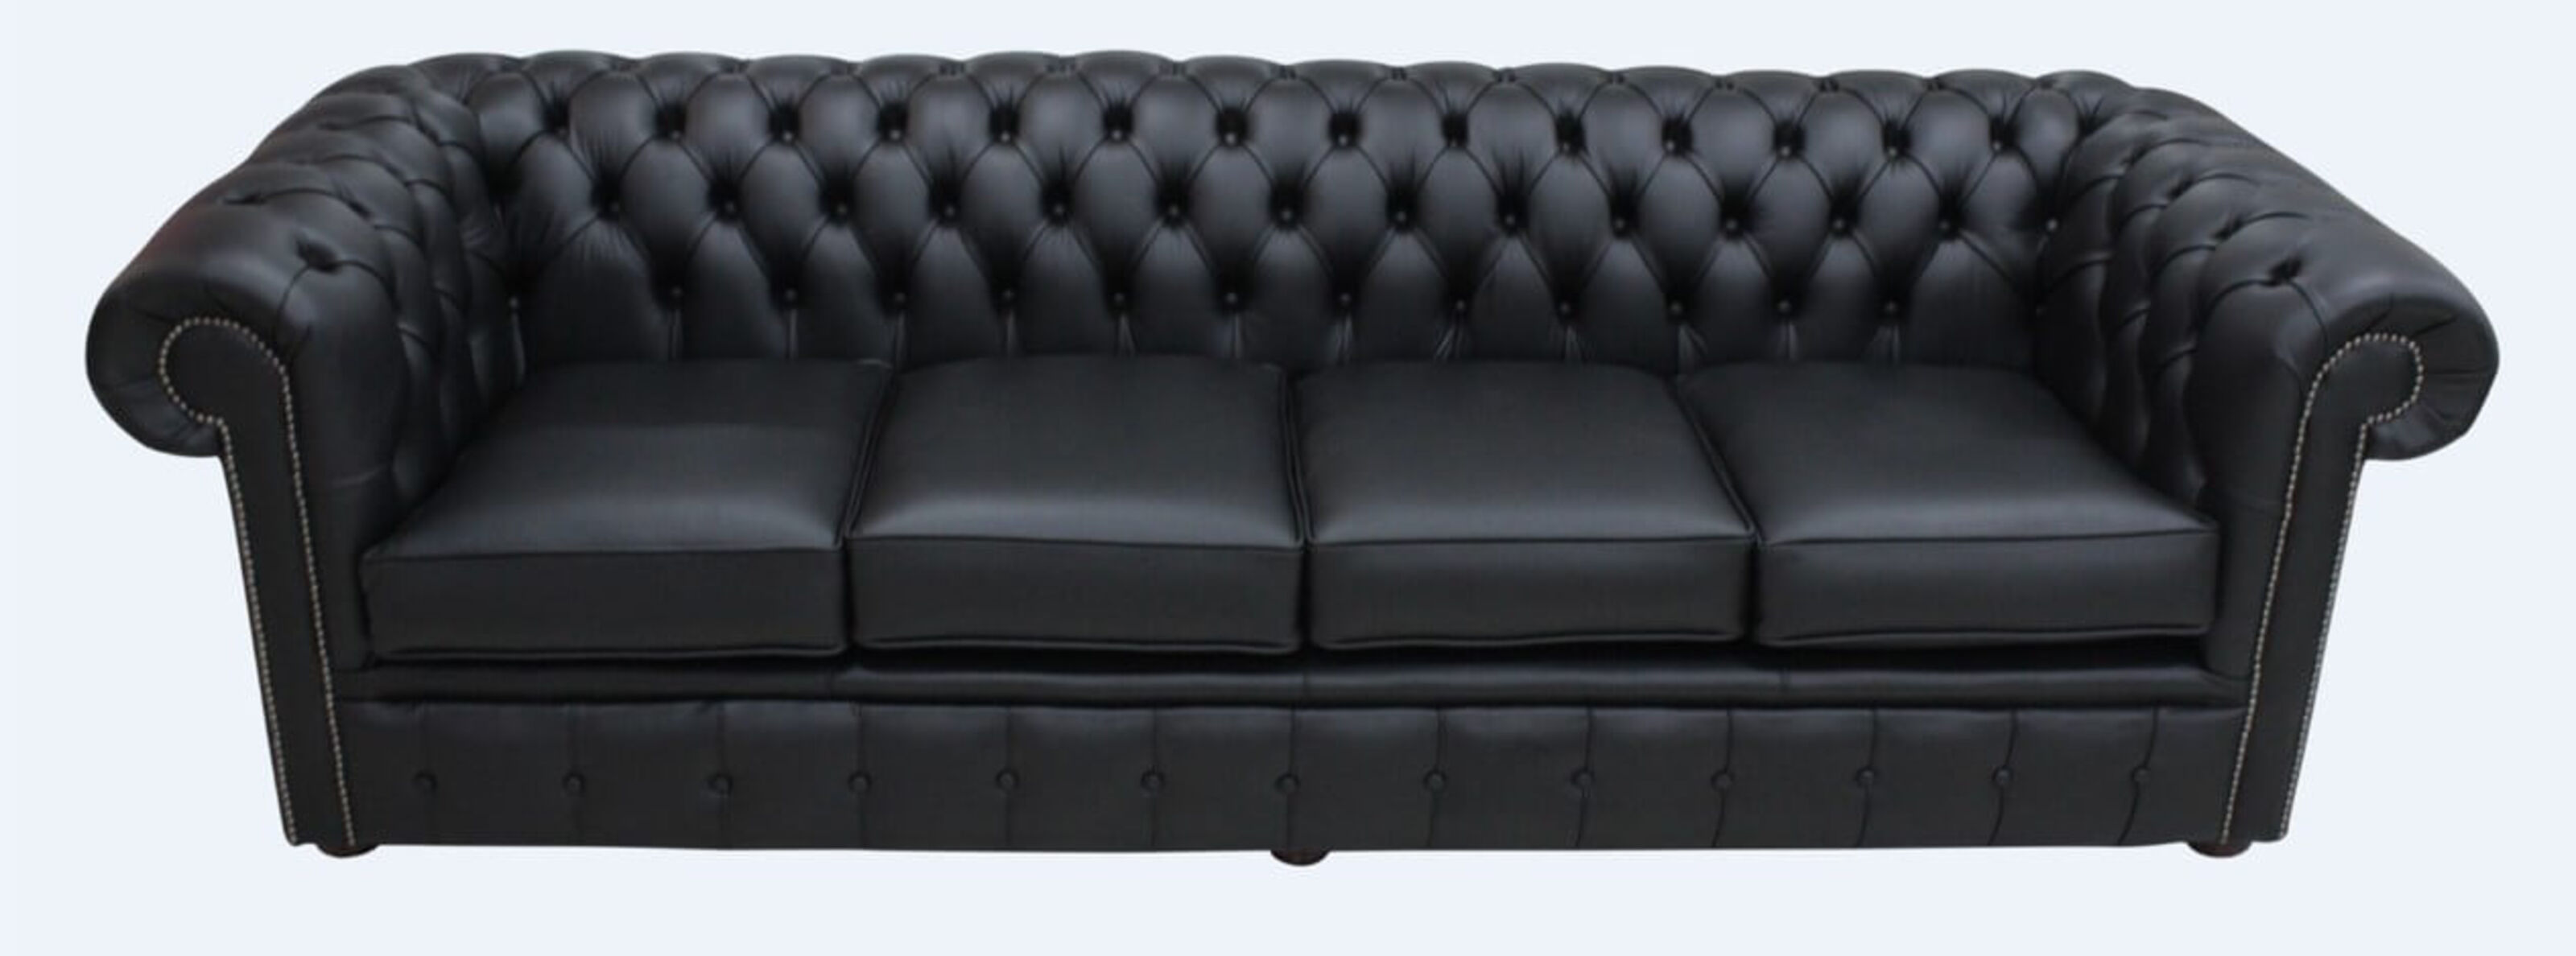 Black Leather Chesterfield Sofa Uk, Patent Leather Sofa